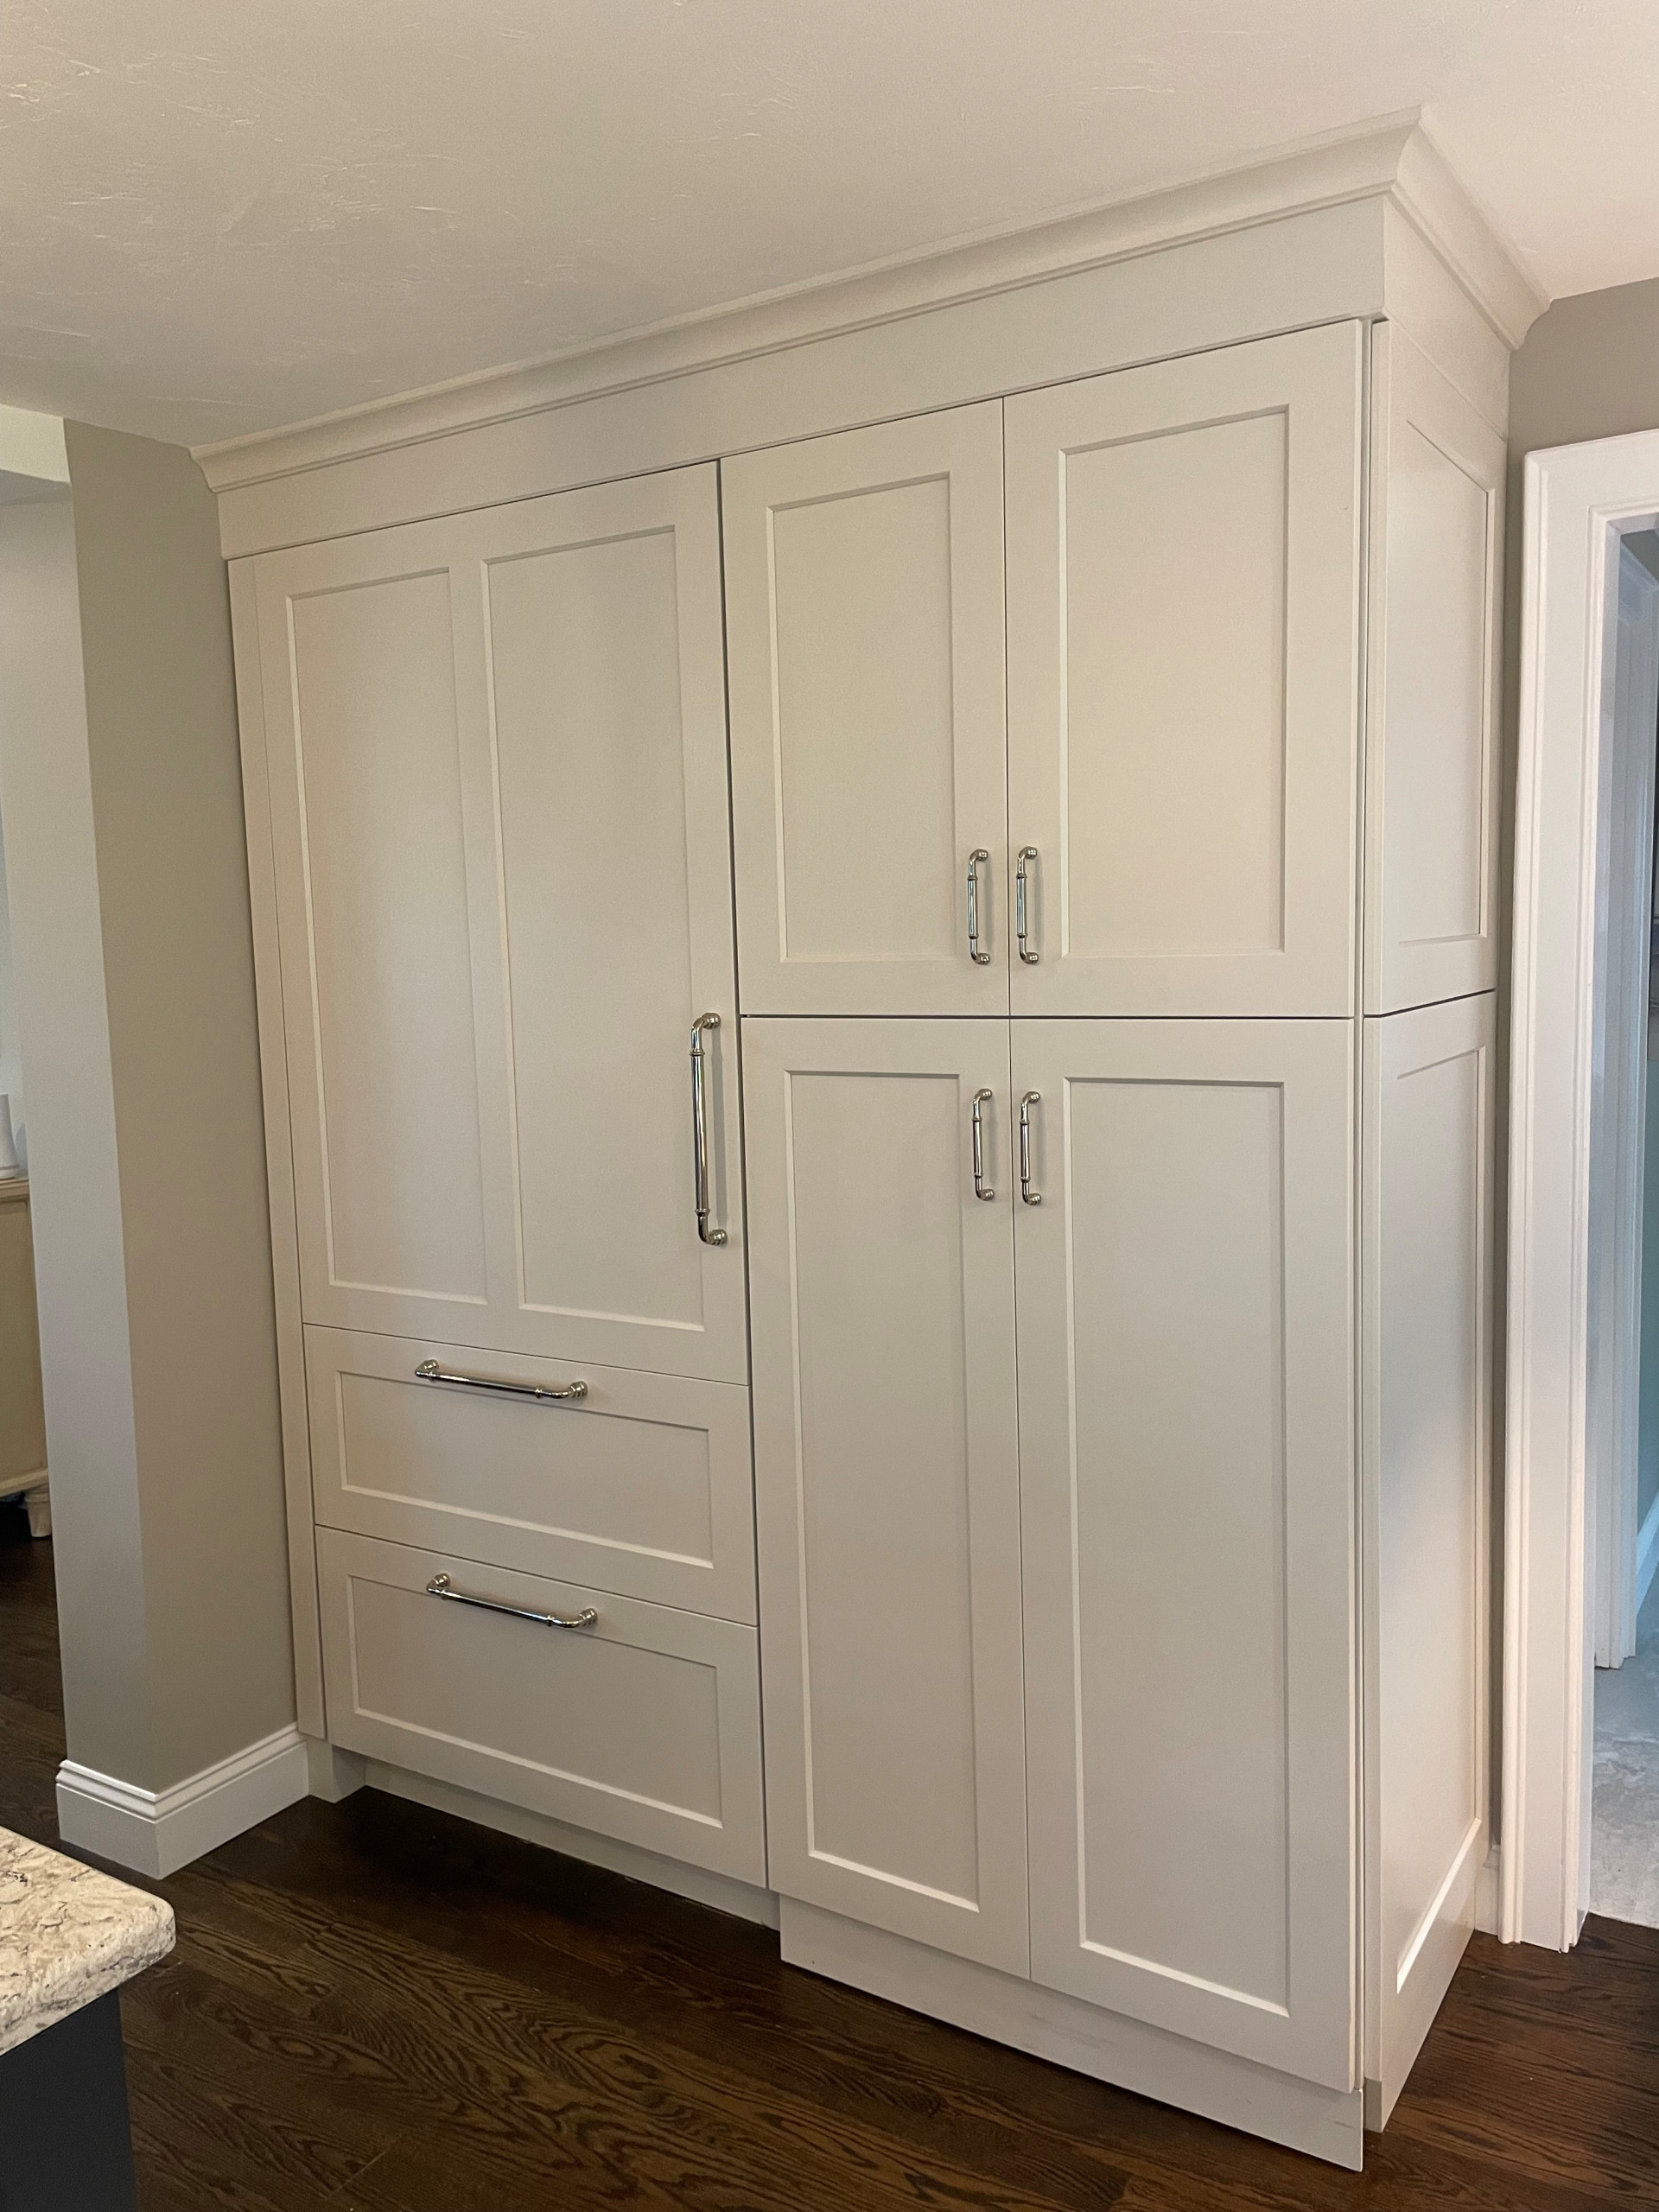 Duxbury Kitchen Expansion and Remodel